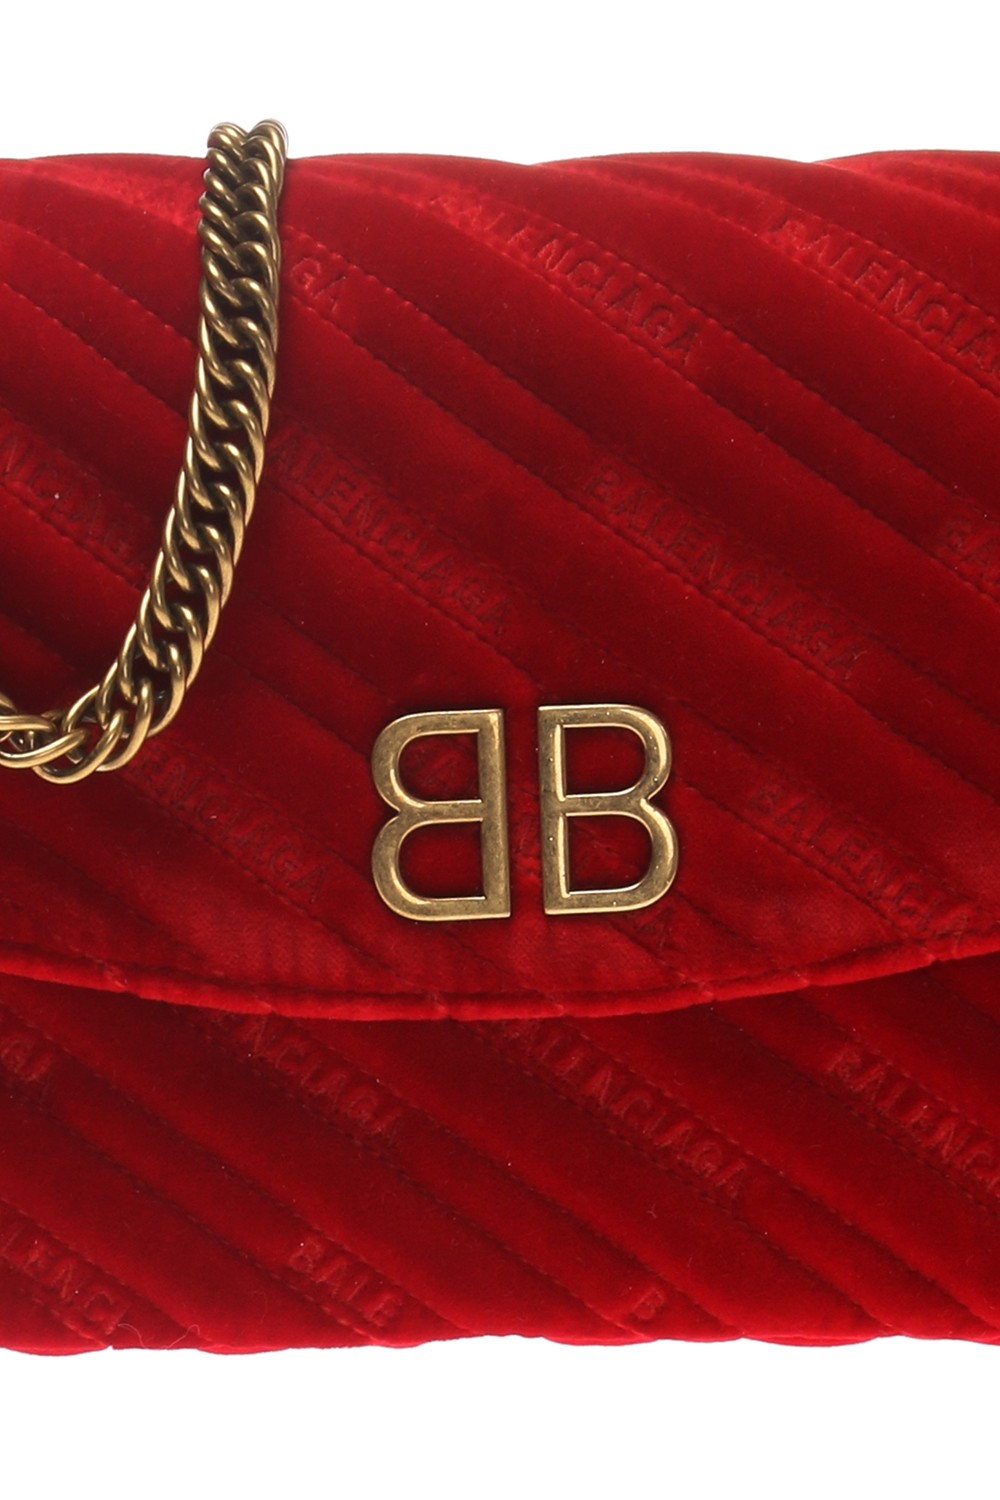 &#39;BB&#39; quilted shoulder bag with an embroidered logo Balenciaga - Vitkac US